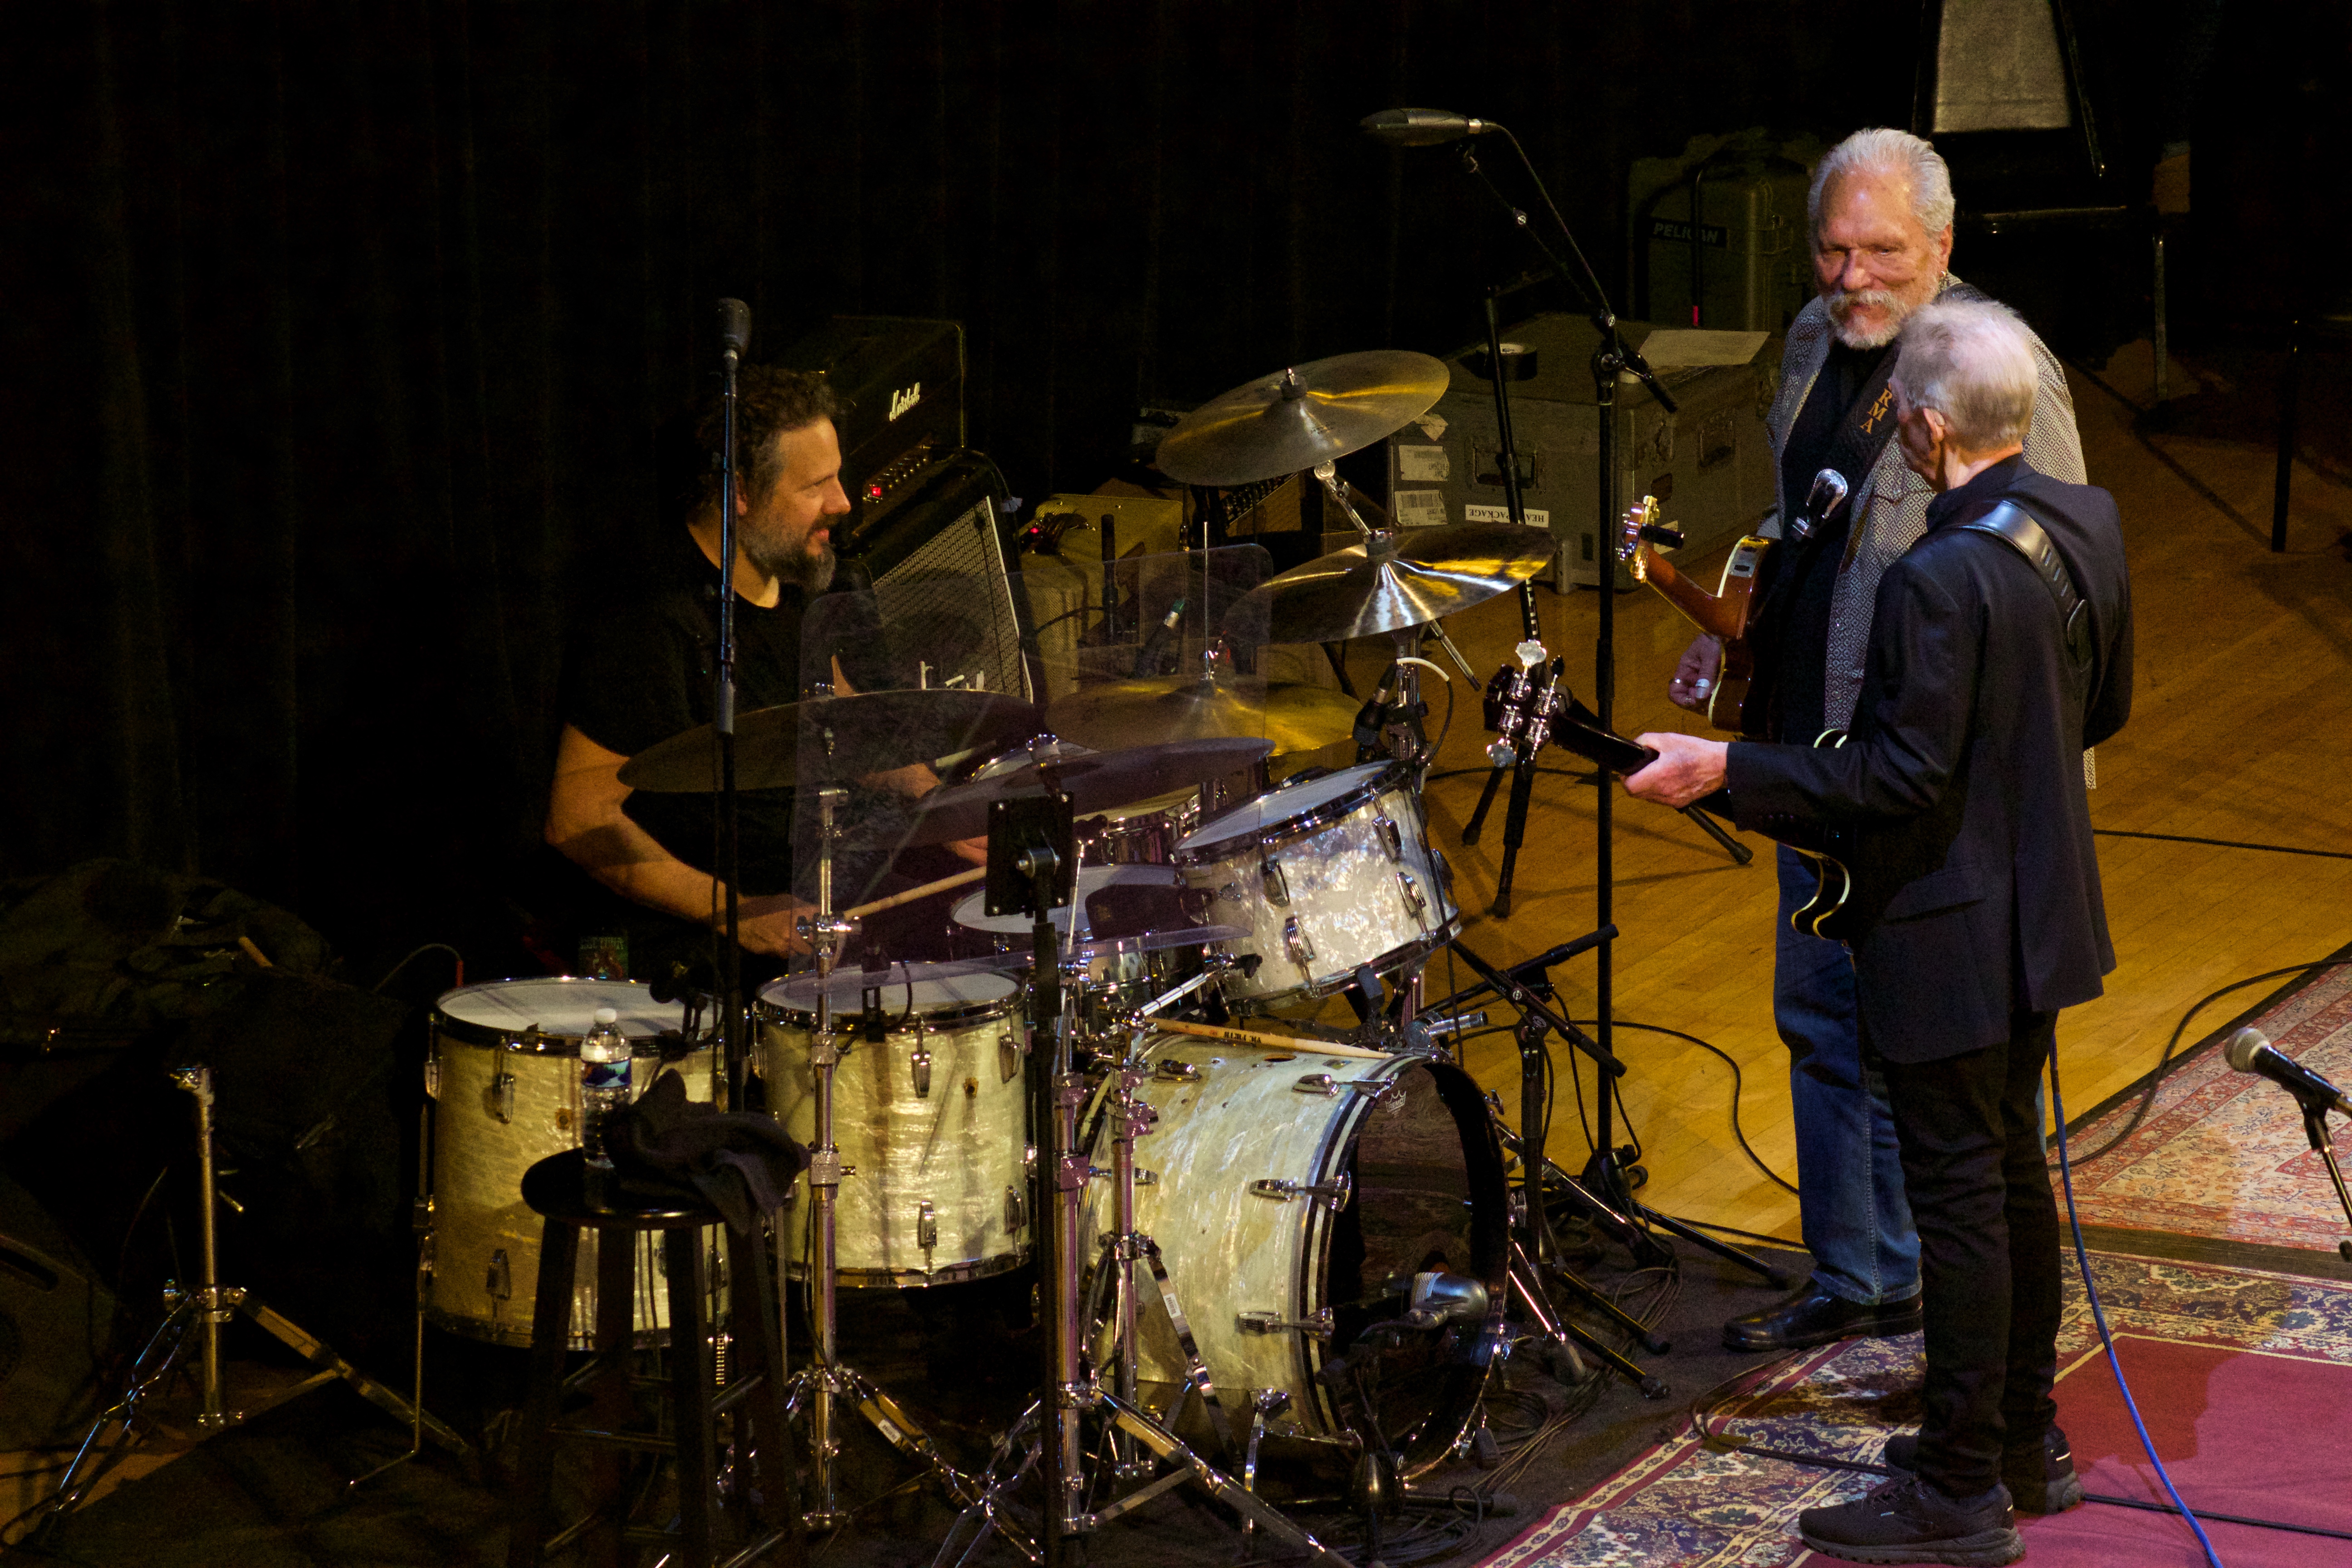 Hot Tuna will be playing shows throughout December